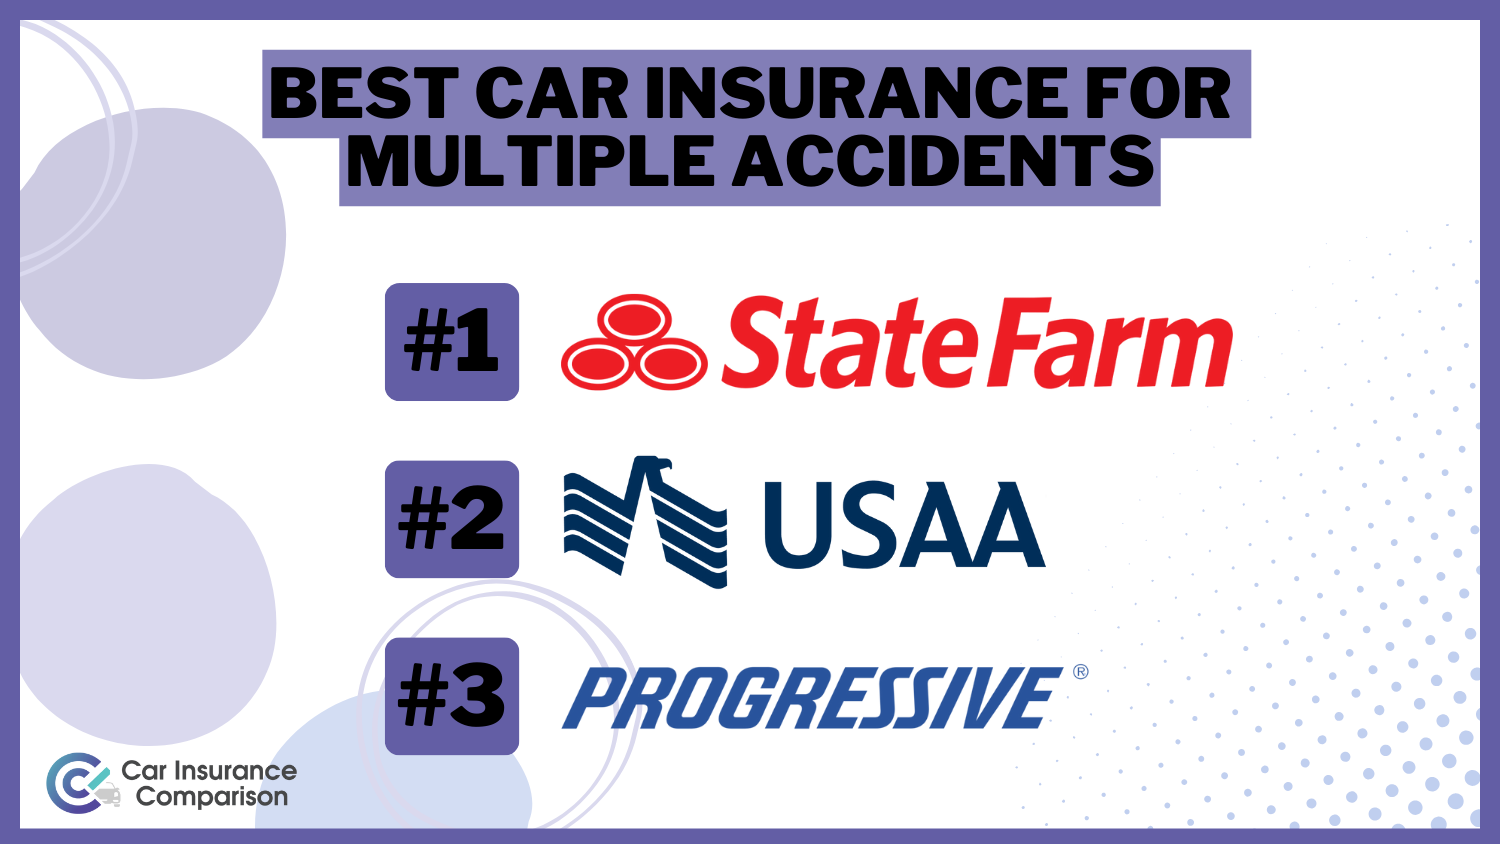 State Farm, USAA, and Progressive: Best Car Insurance for Multiple Accidents